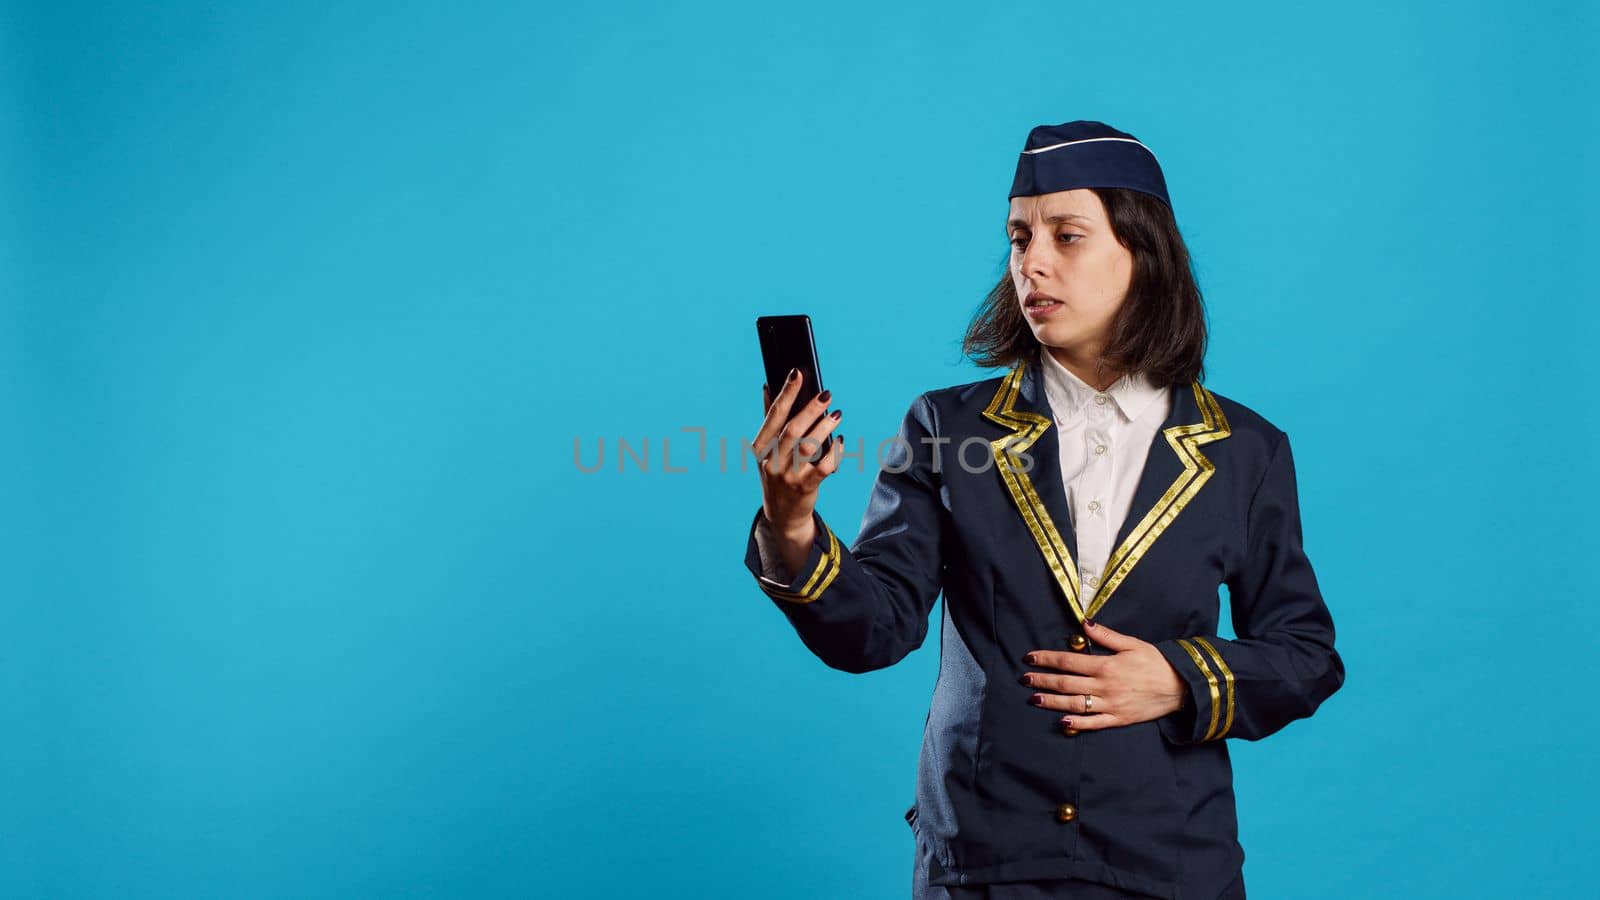 Air hostess attending online video call conference by DCStudio